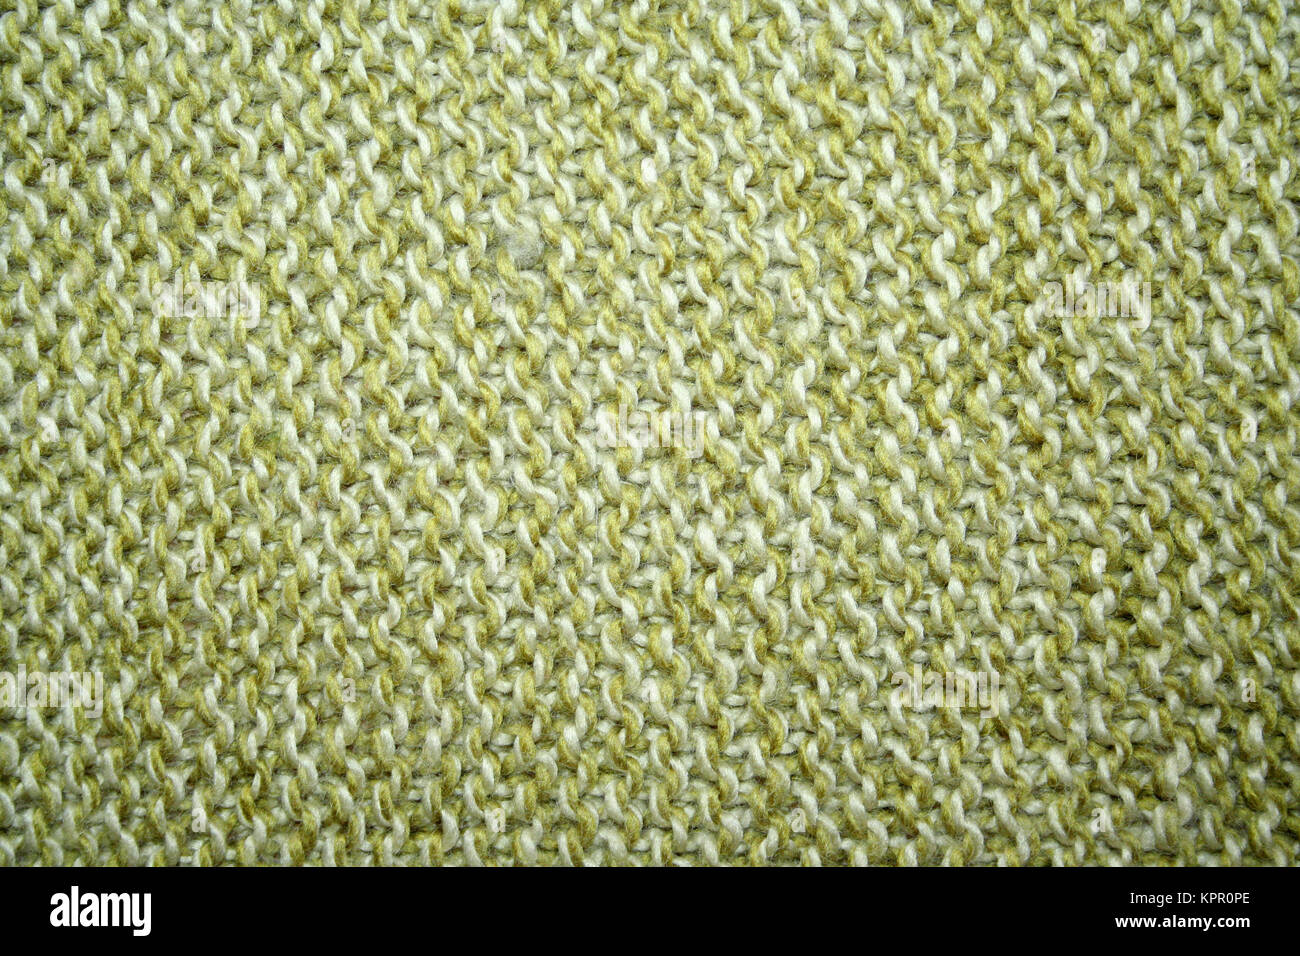 green color knitted wool as background Stock Photo